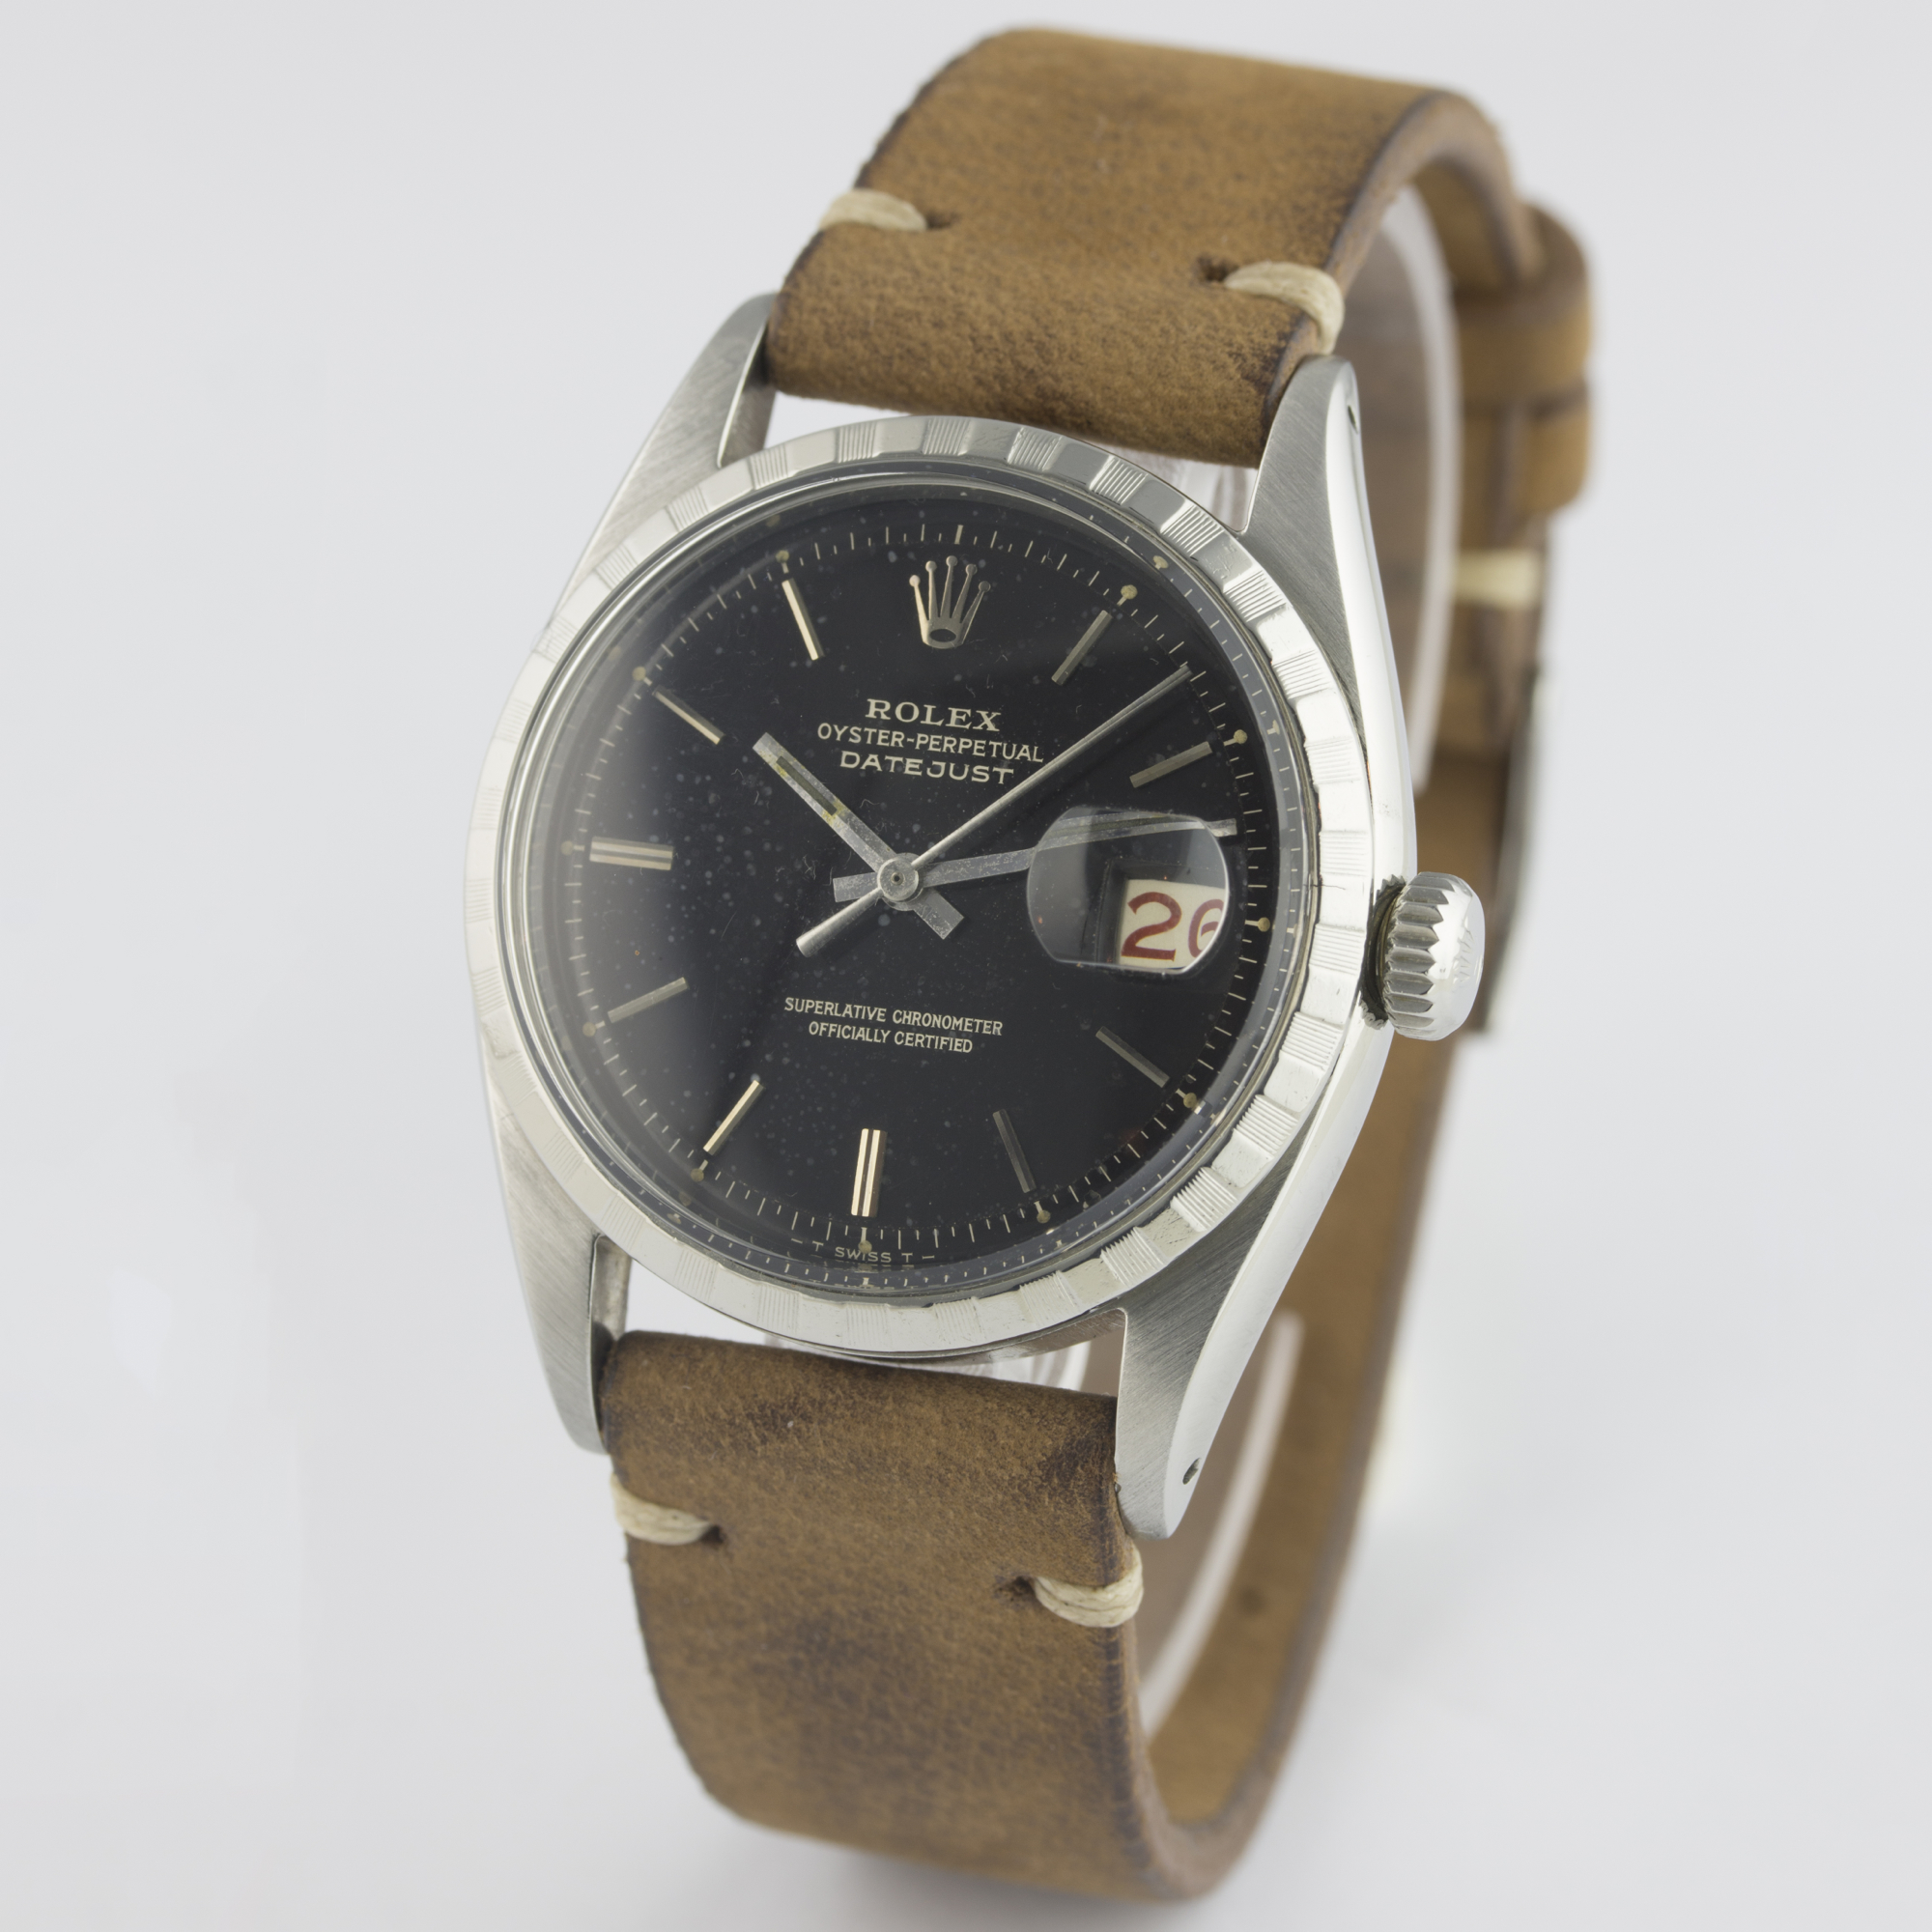 A RARE GENTLEMAN'S STAINLESS STEEL ROLEX OYSTER PERPETUAL DATEJUST WRIST WATCH CIRCA 1960, REF. 6605 - Image 5 of 9